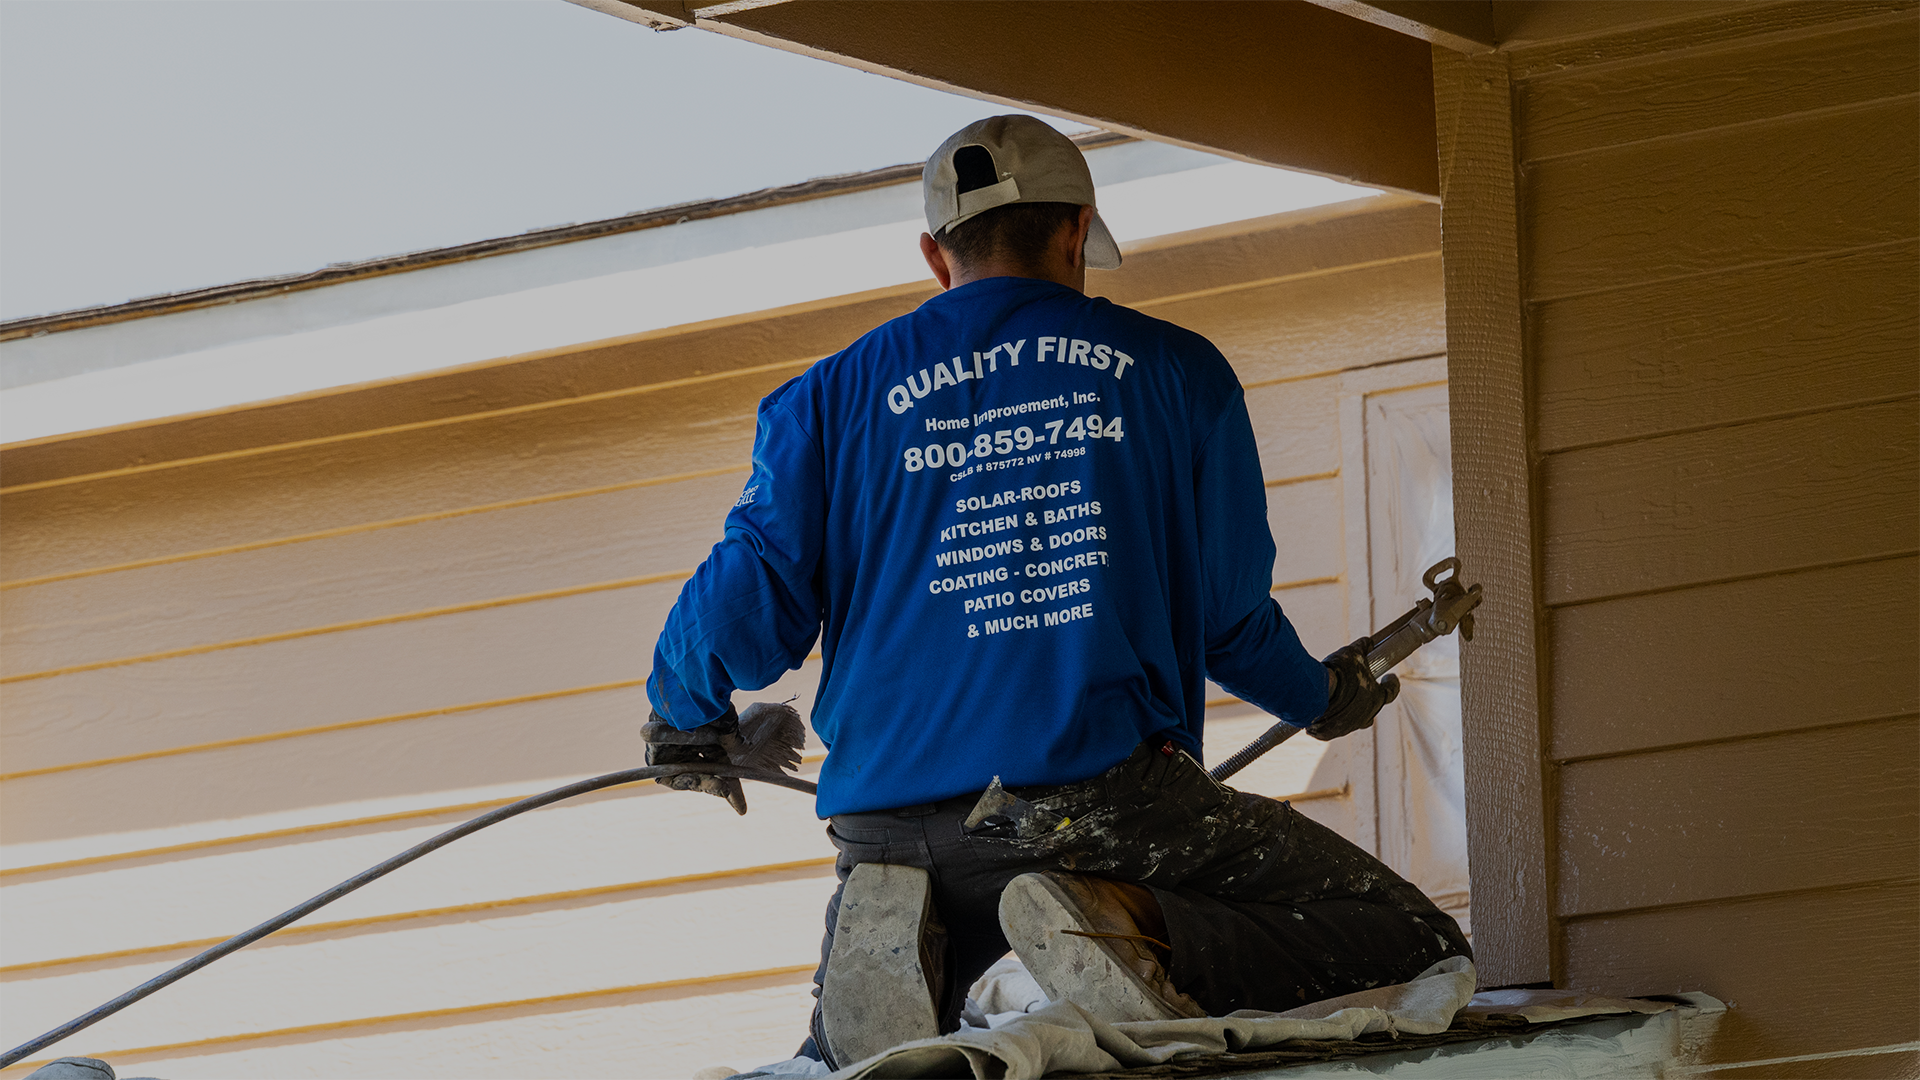 Quality First Home Improvement Installer Spraying Exterior Coating in Sacramento, CA